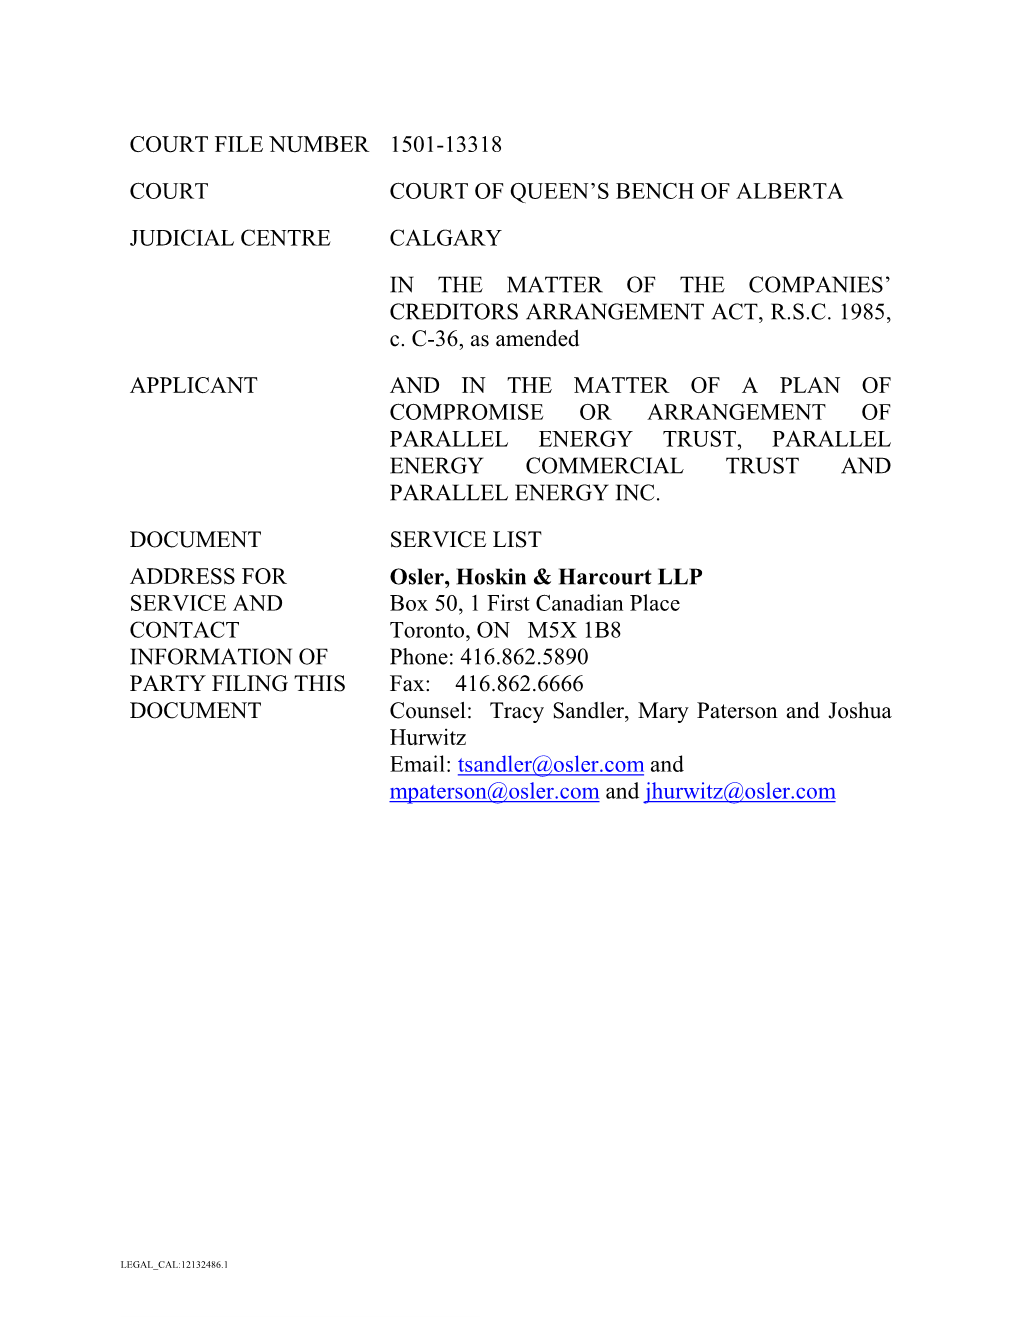 Court File Number 1501-13318 Court Court of Queen's